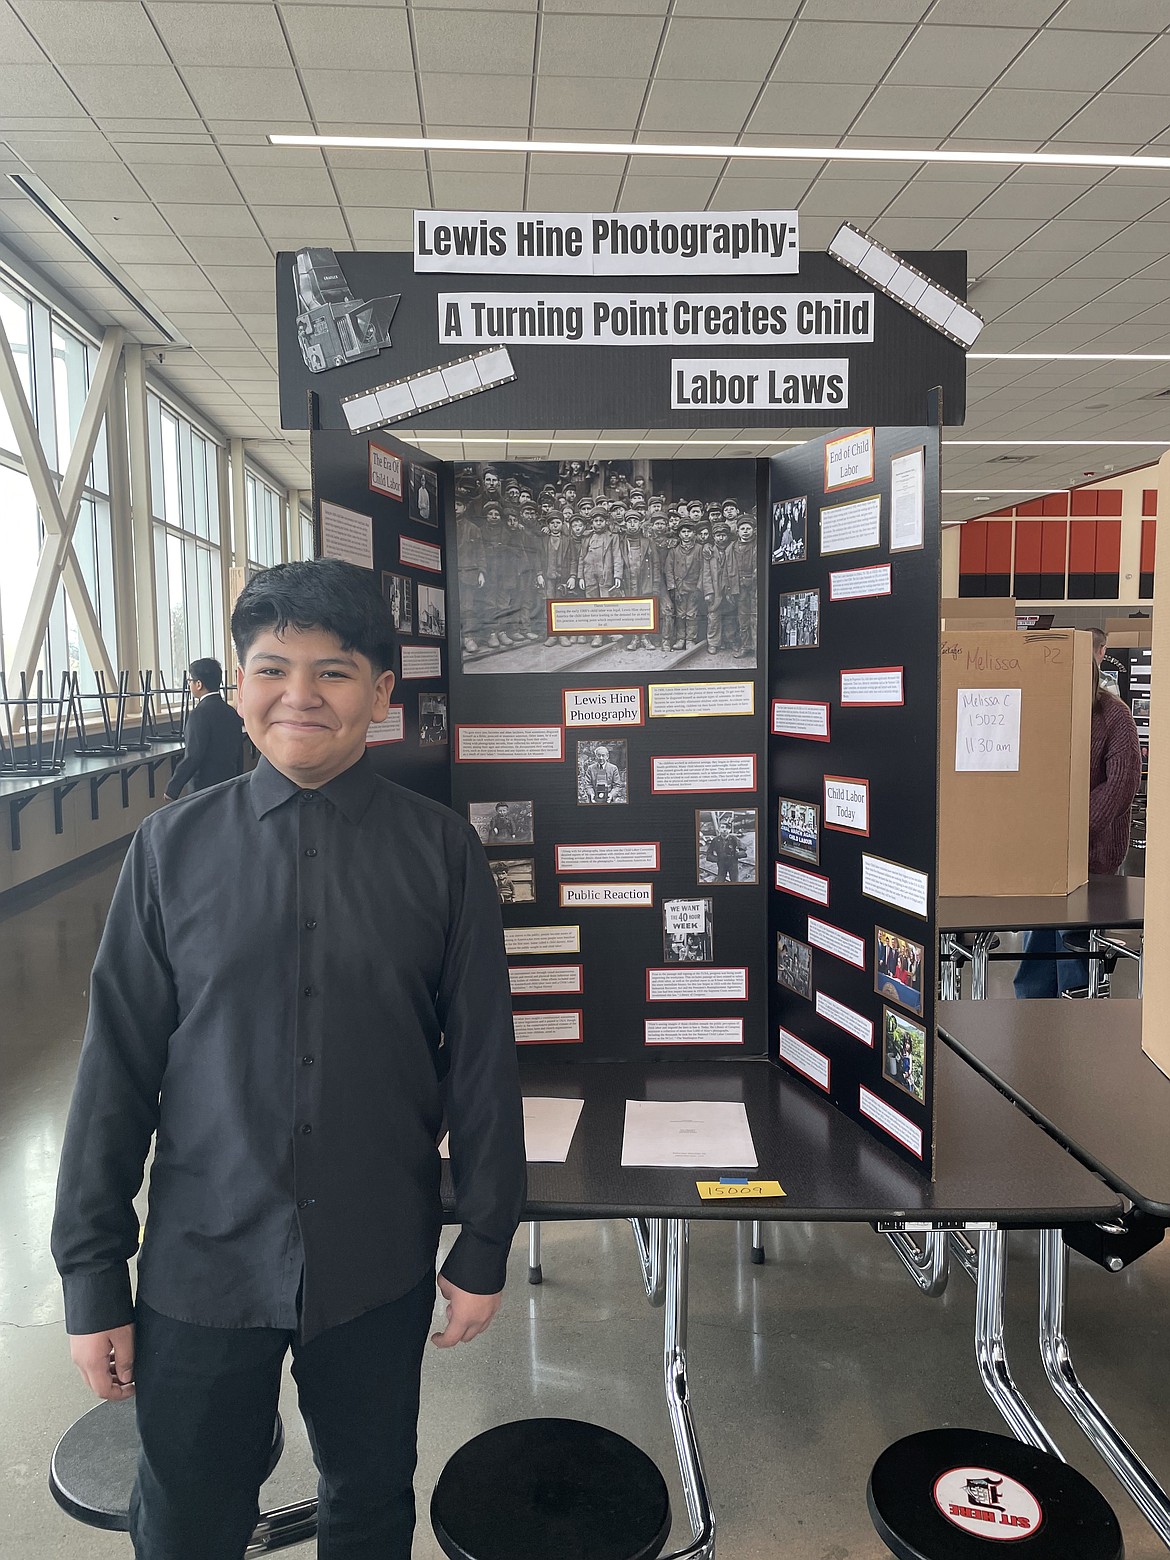 Jose Villanueva took first place for his research into the early-20th-century photography of Lewis Hine, which led to radical reform in child labor laws.